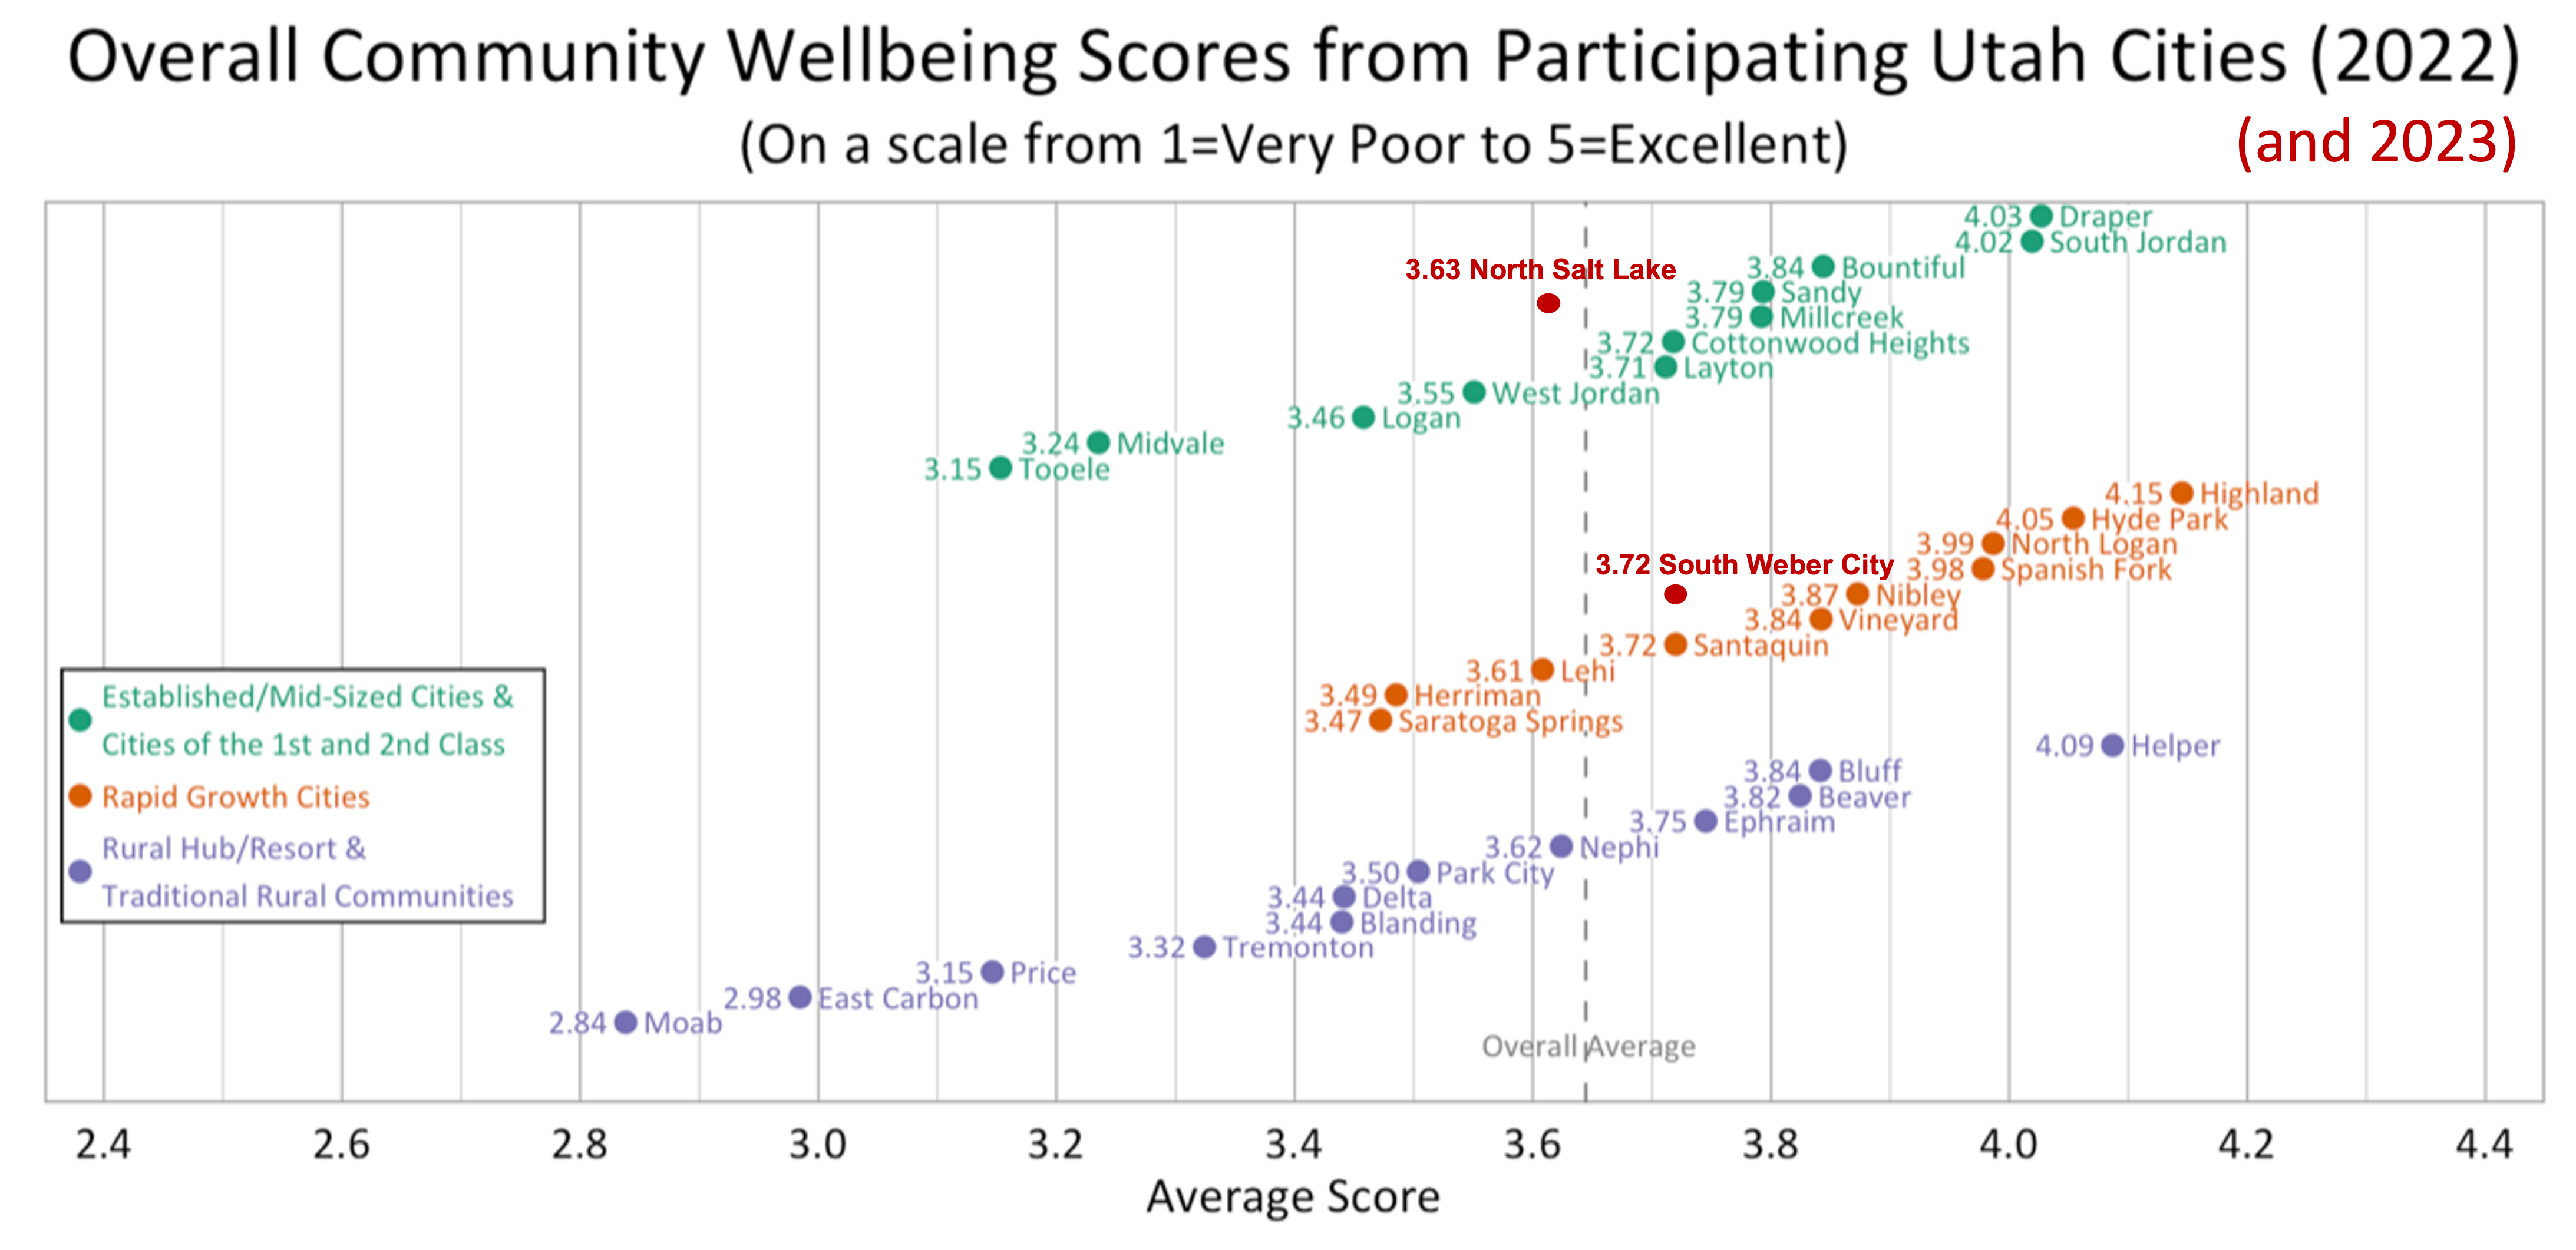 Dot Plot. Title: Overall Community Wellbeing Scores from Participating Utah Cities (2022). Subtitle: (On a scale from 1=Very Poor to 5=Excellent). Group: Established/Mid-Sized Cities. Draper: Average Score 4.03; South Jordan: Average Score 4.02; Bountiful: Average Score 3.84; Sandy: Average Score 3.79; Millcreek: Average Score 3.79; Cottonwood Heights: Average Score 3.72; Layton: Average Score 3.71; West Jordan: Average Score 3.55; Logan: Average Score 3.46; Midvale: Average Score 3.24; Tooele: Average Score 3.15. Group: Rapid Growth Cities. Highland: Average Score 4.15; Hyde Park: Average Score 4.05; North Logan: Average Score 3.99; Spanish Fork: Average Score 3.98; Nibley: Average Score 3.87; Vineyard: Average Score 3.84; South Weber City: Average Score 3.72; Santaquin: Average Score 3.72; Lehi: Average Score 3.61; Herriman: Average Score 3.49; Saratoga Springs: Average Score 3.47. Group: Rural, Rural Hub, & Resort and Traditional Communities. Helper: Average Score 4.09; Bluff: Average Score 3.84; Beaver: Average Score 3.82; Ephraim: Average Score 3.75; Nephi: Average Score 3.62; Park City: Average Score 3.50; Delta: Average Score 3.44; Blanding: Average Score 3.44; Tremonton: Average Score: 3.32; Price: Average Score 3.15; East Carbon: Average Score: 2.98; Moab: Average Score: 2.84. 